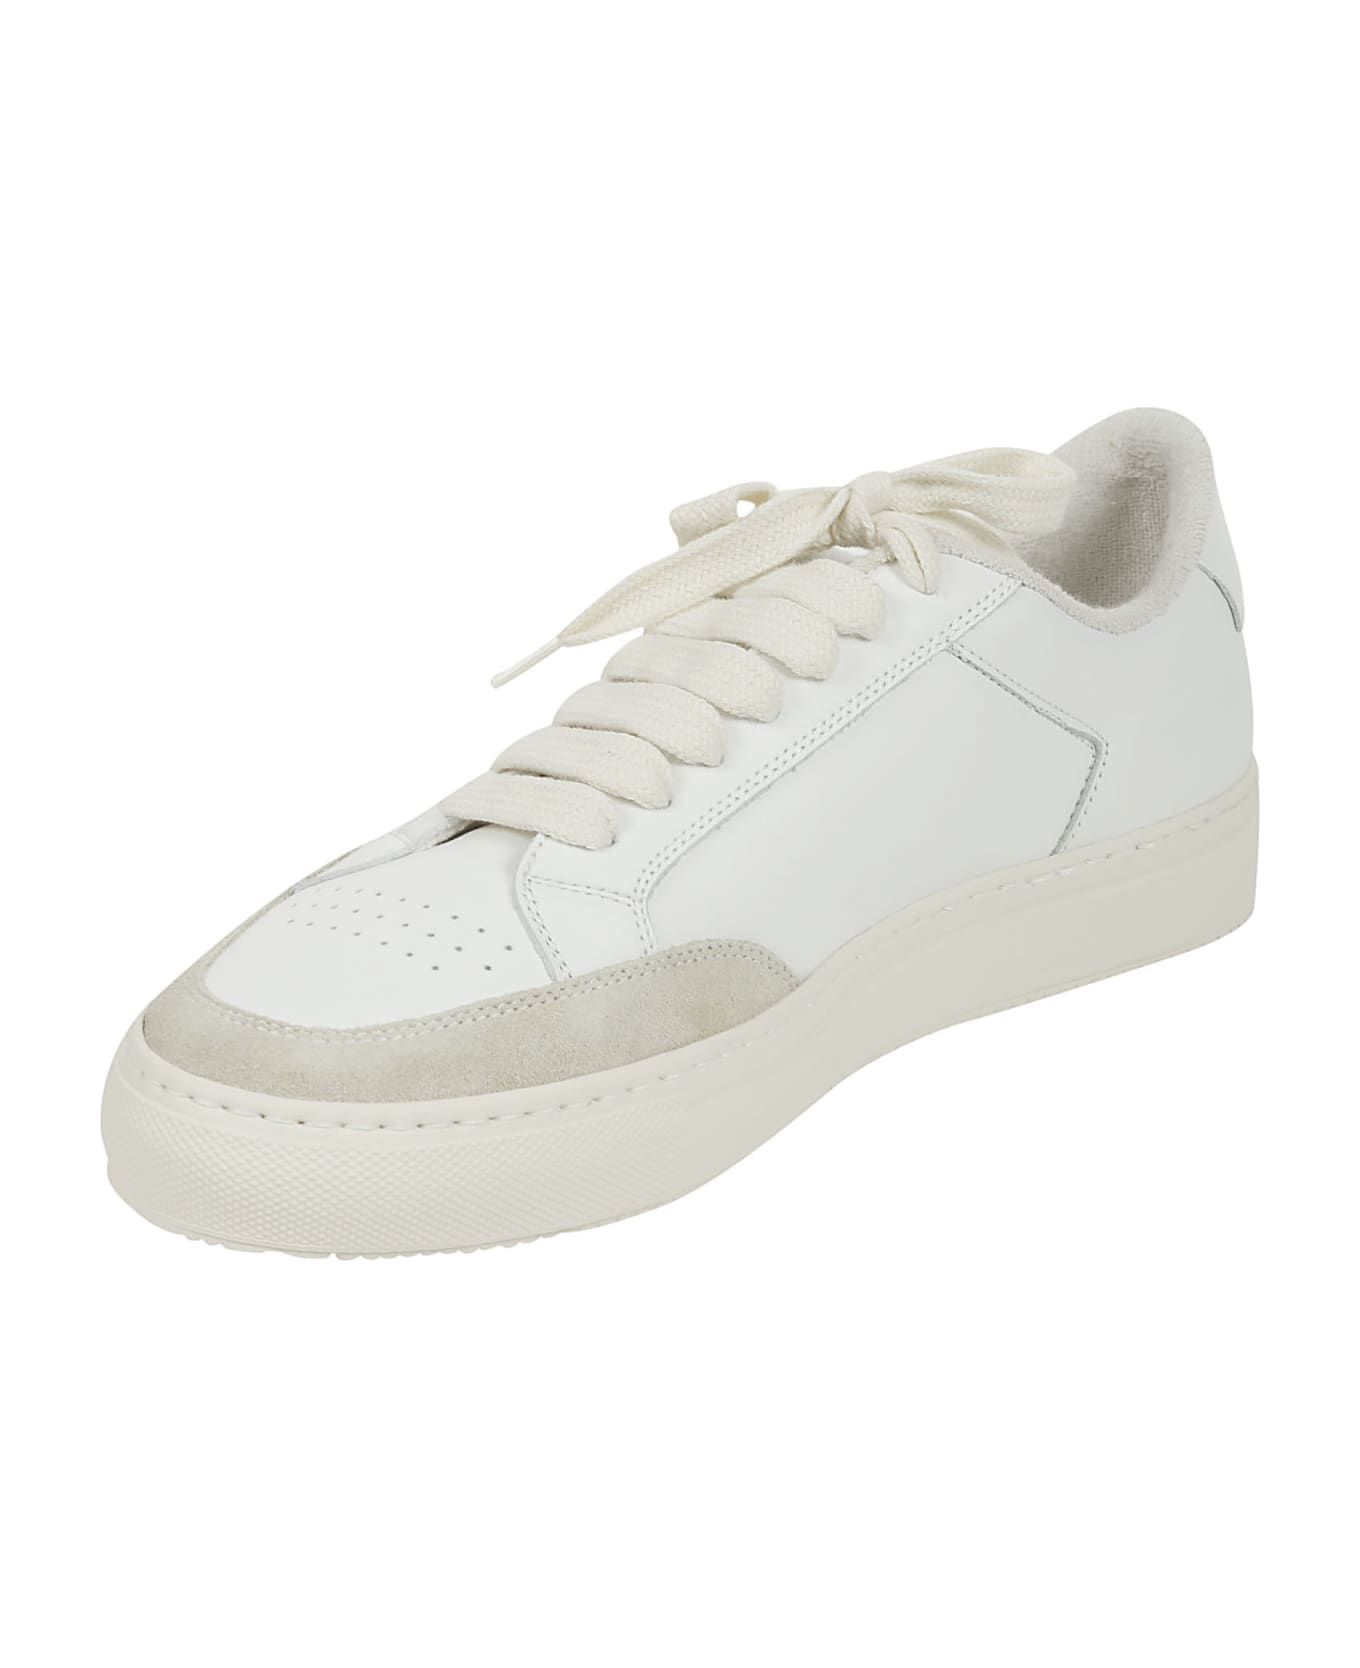 Common Projects Tennis Pro - White スニーカー